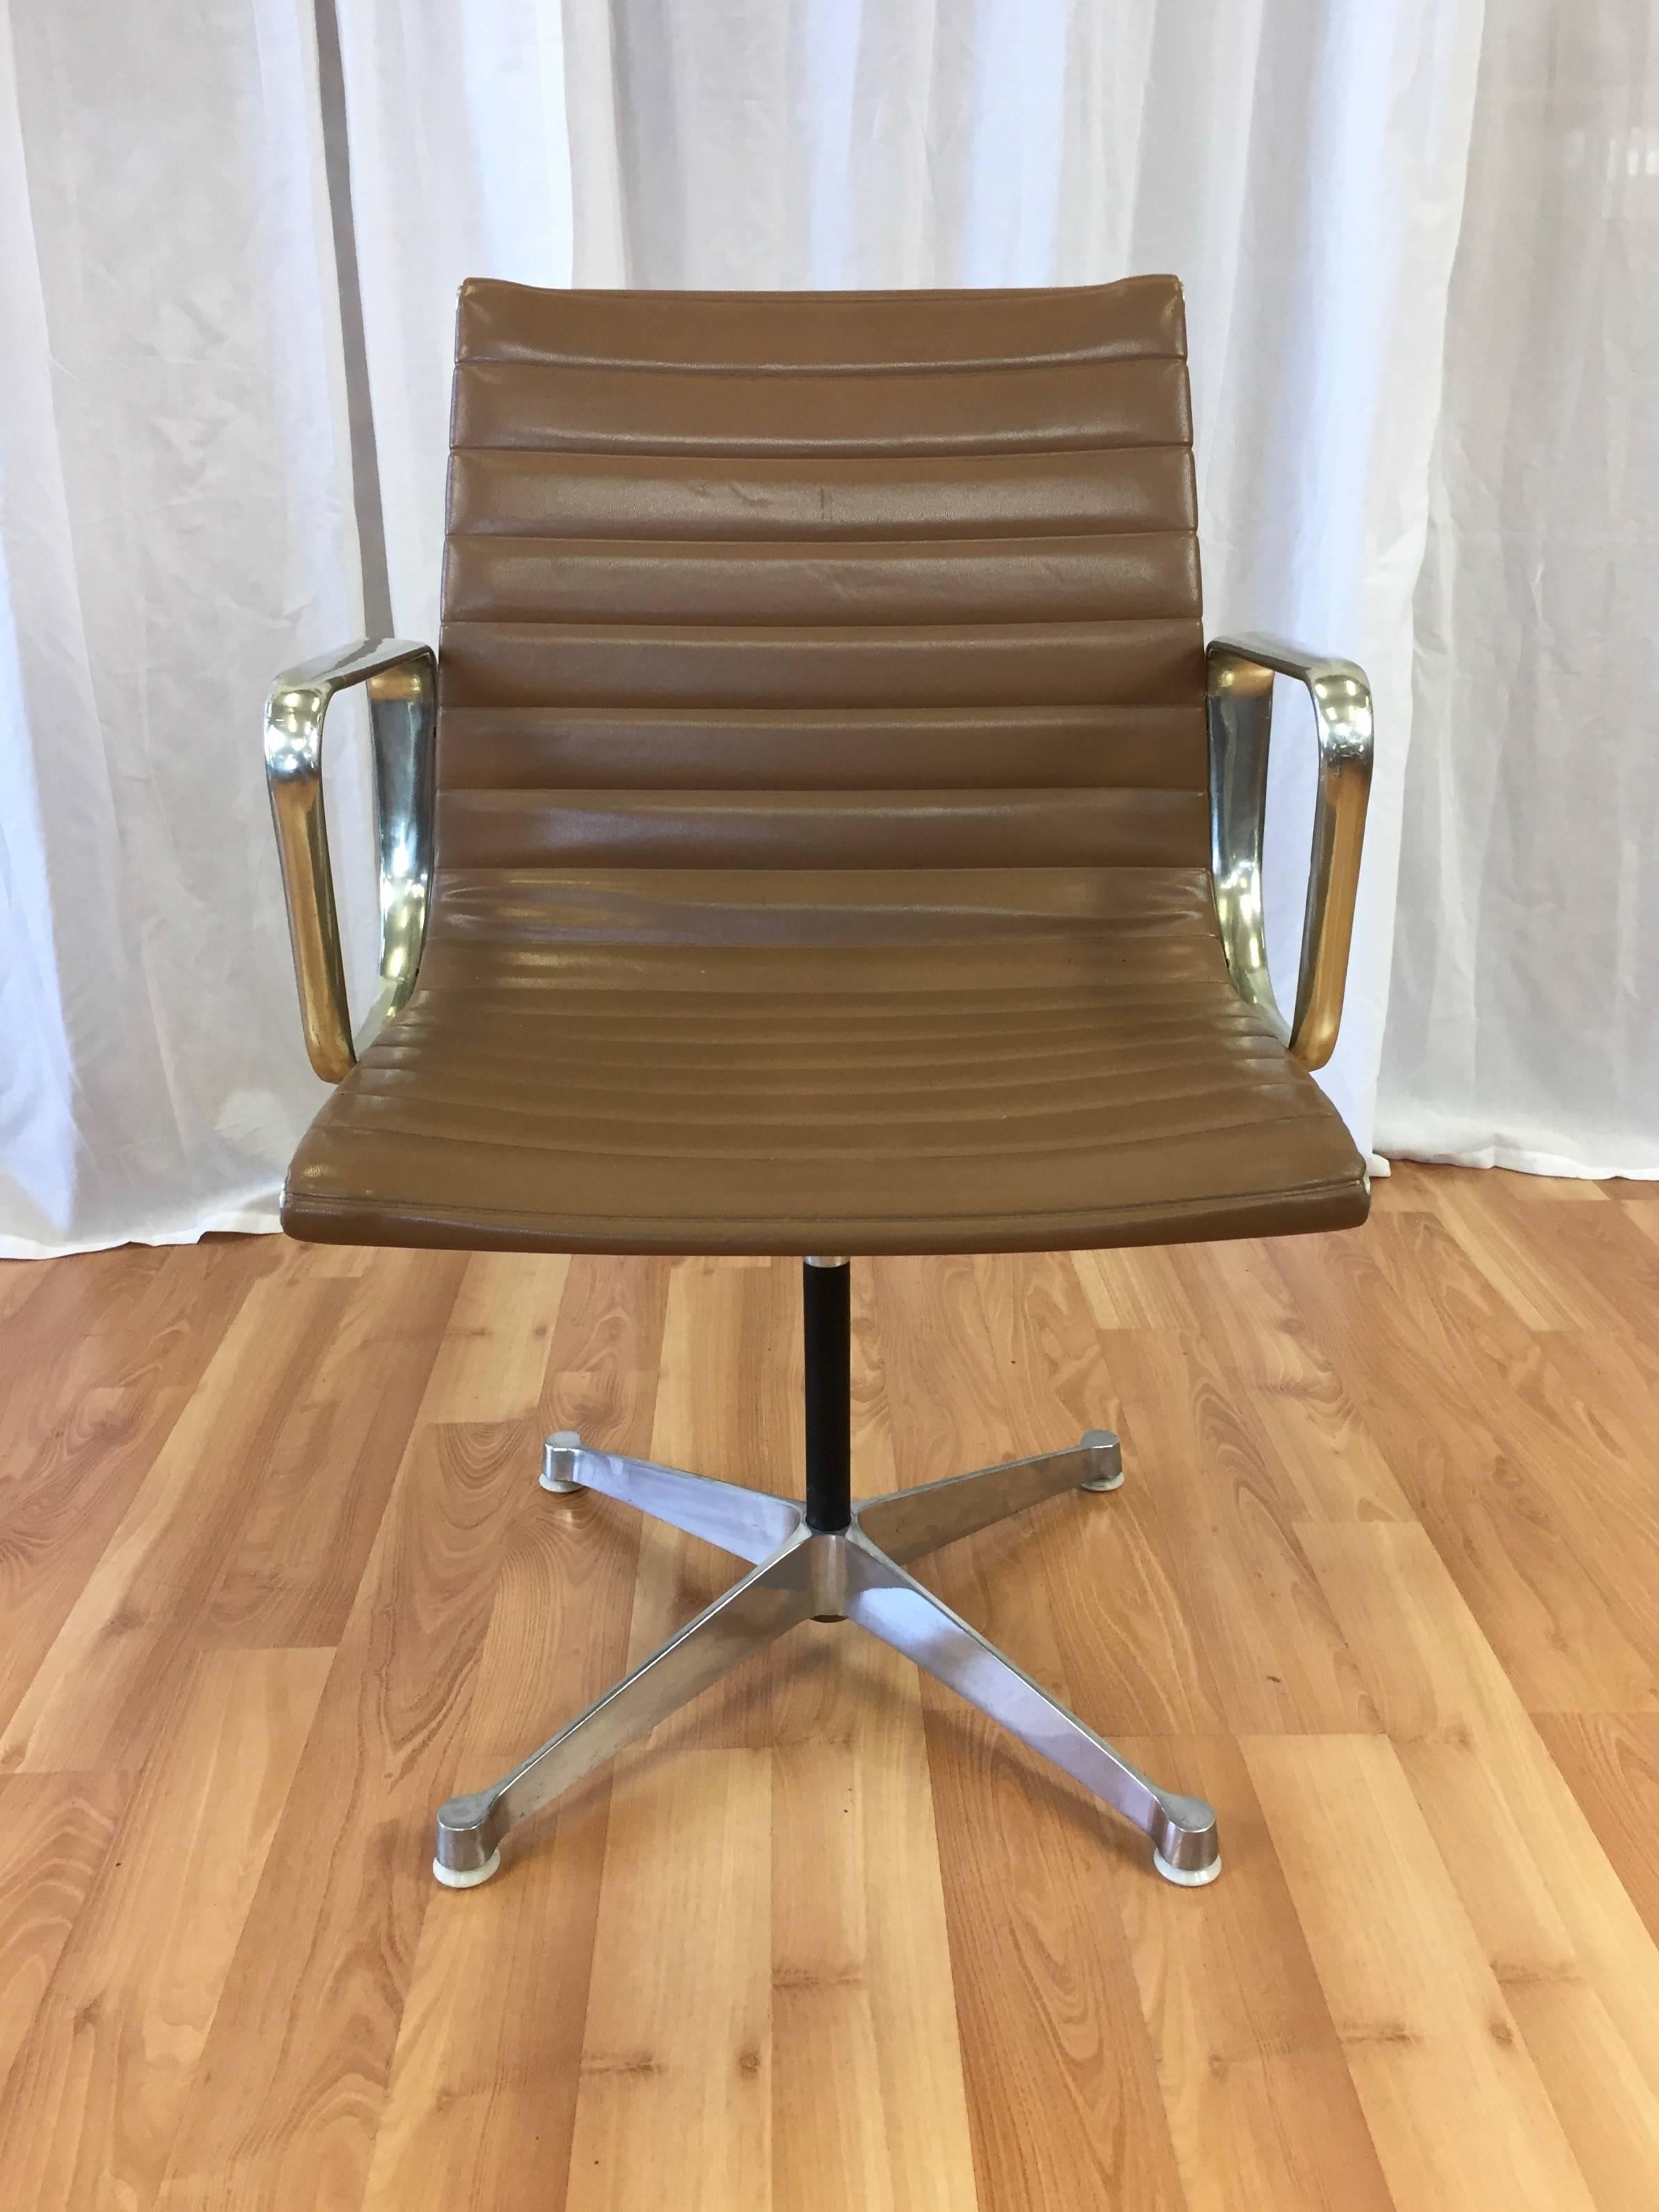 A very early production aluminium group management chair with arms by Charles Eames for Herman Miller.

This example features “Patent Pending” stamped into the frame, which allows us to date it as being from 1958-1959, the first year and a half of